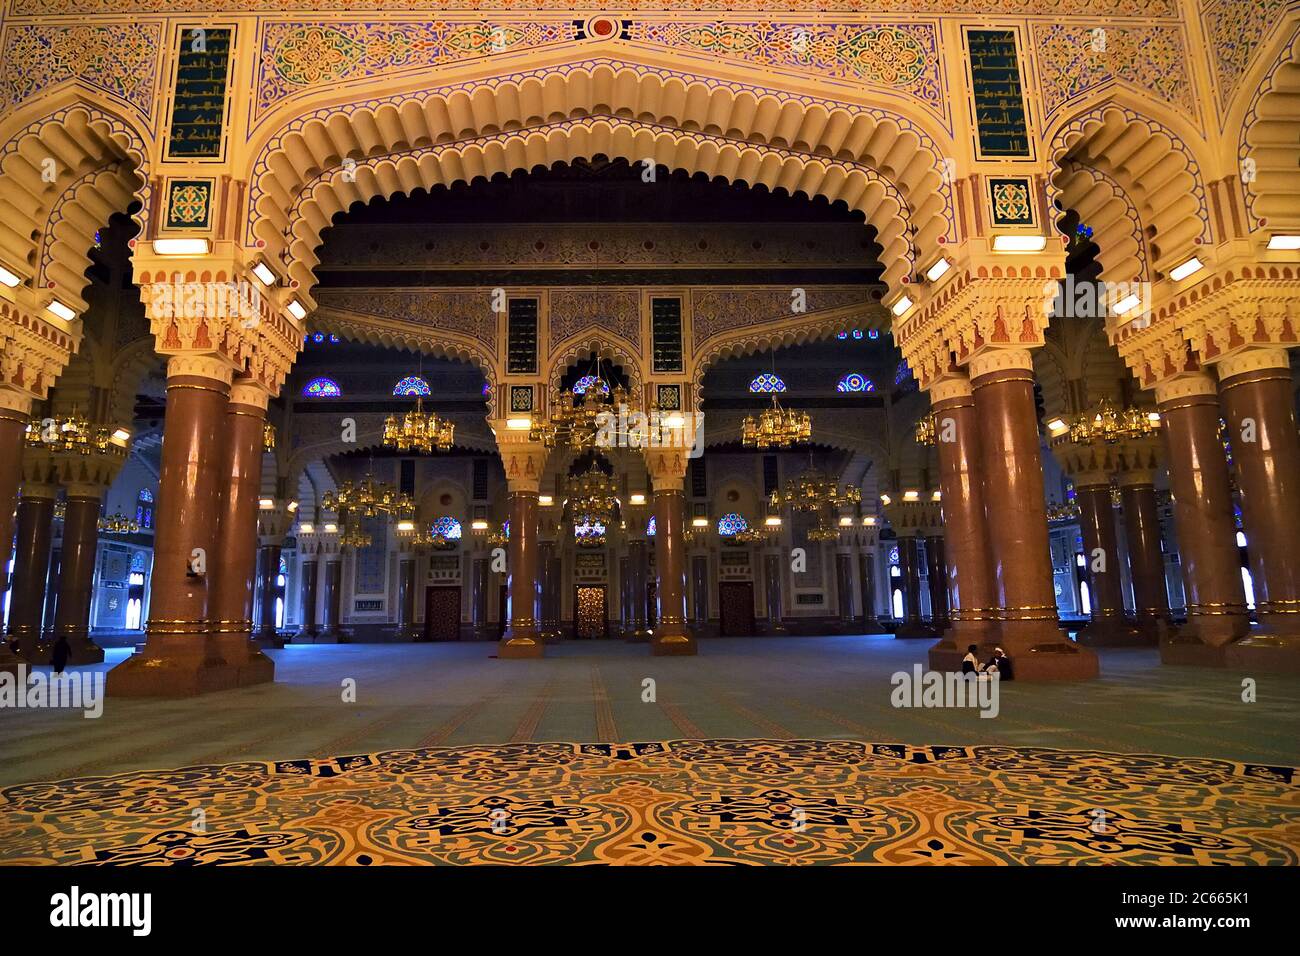 Sanaa, Yemen - March 6, 2010: Interior of AL-Saleh mosque. This modern mosque has a central hall which is 13596 square metres with an occupancy capaci Stock Photo